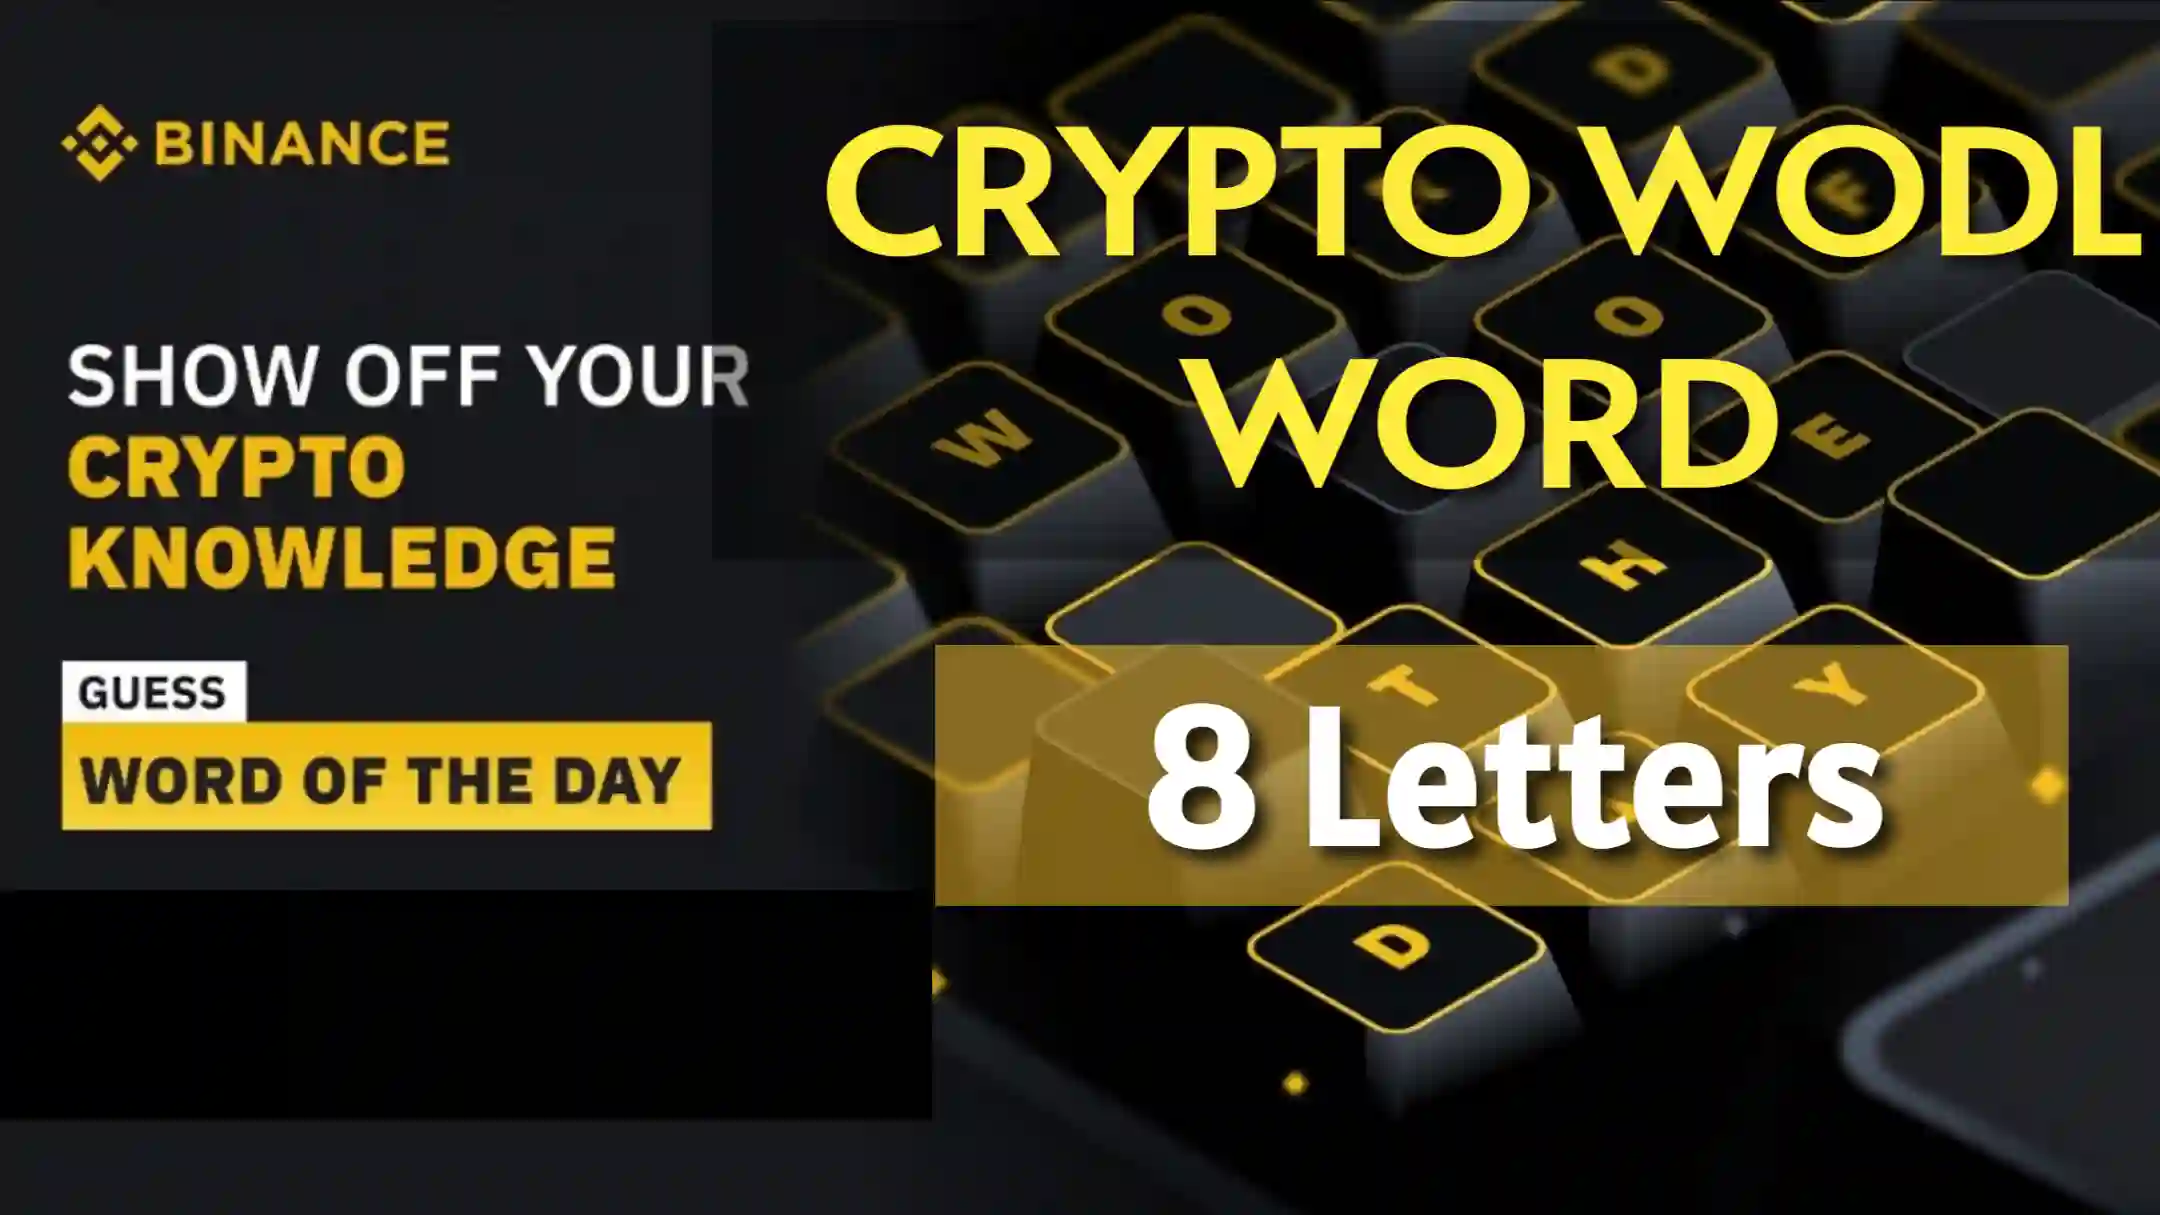 Crypto Wodl Binance Answer 8 Letters Today